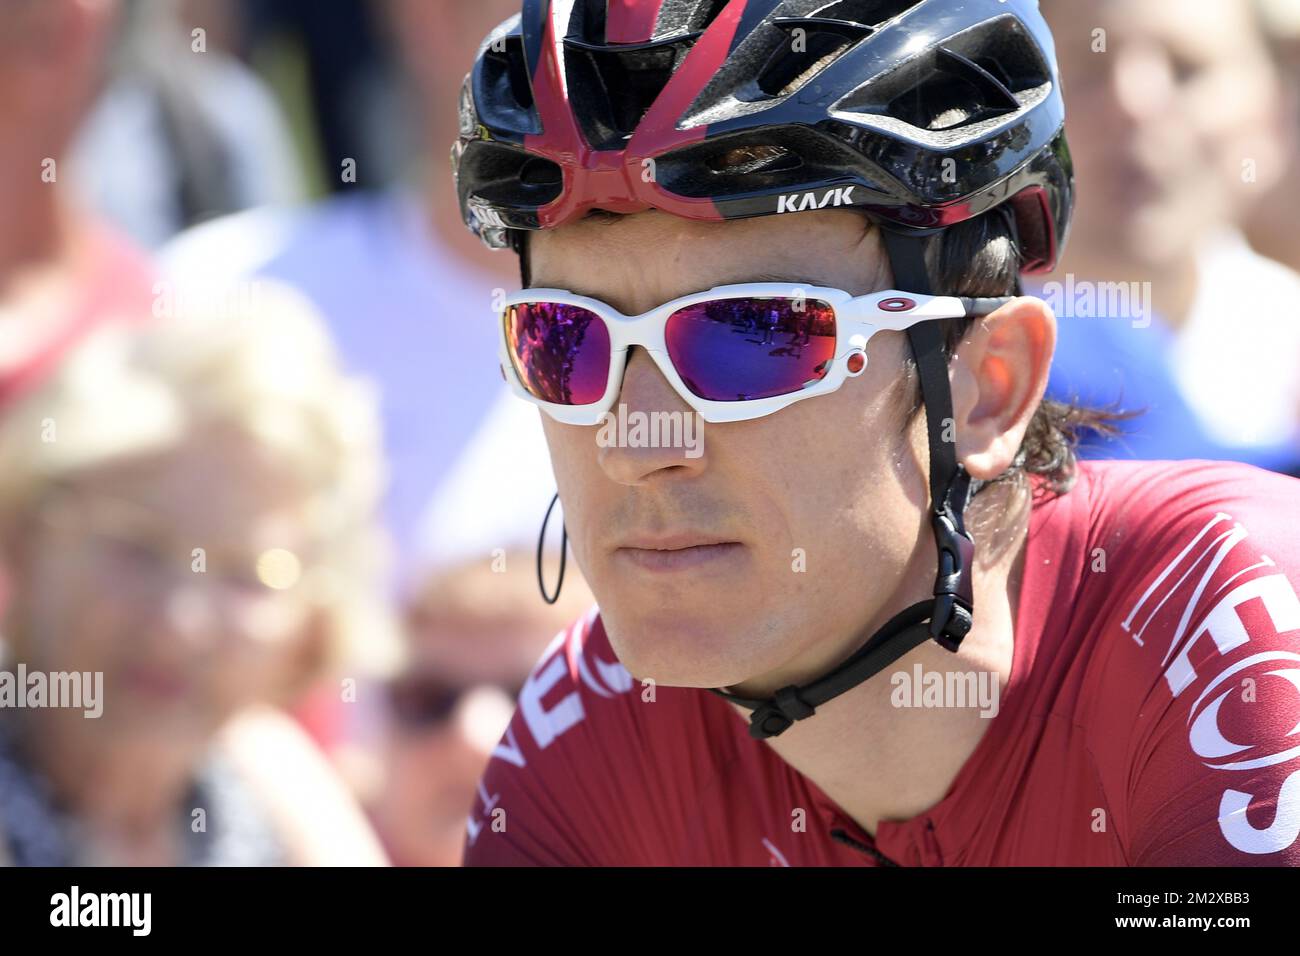 British Geraint Thomas of Team Ineos pictured before the start of the fifth stage of the 106th edition of the Tour de France cycling race, 175,5 km from Saint-Die-des-Vosges to Colmar, Wednesday 10 July 2019. This year's Tour de France starts in Brussels and takes place from July 6th to July 28th. BELGA PHOTO YORICK JANSENS Stock Photo